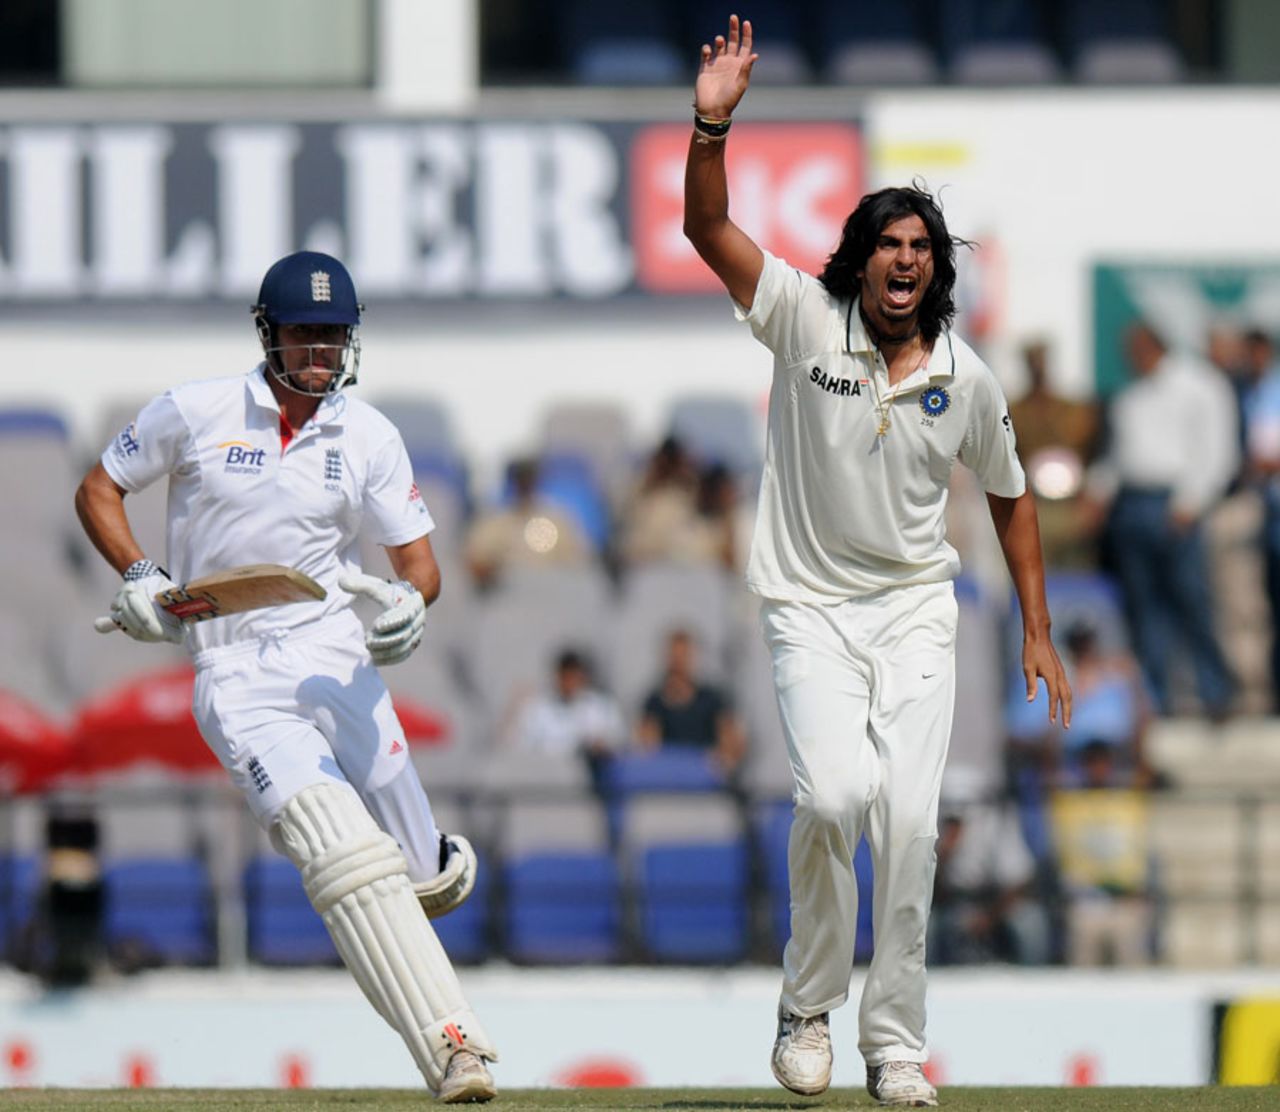 Ishant Sharma appeals unsuccessfully for the wicket of Alastair Cook, India v England, 4th Test, Nagpur, 4th day, December 16, 2012